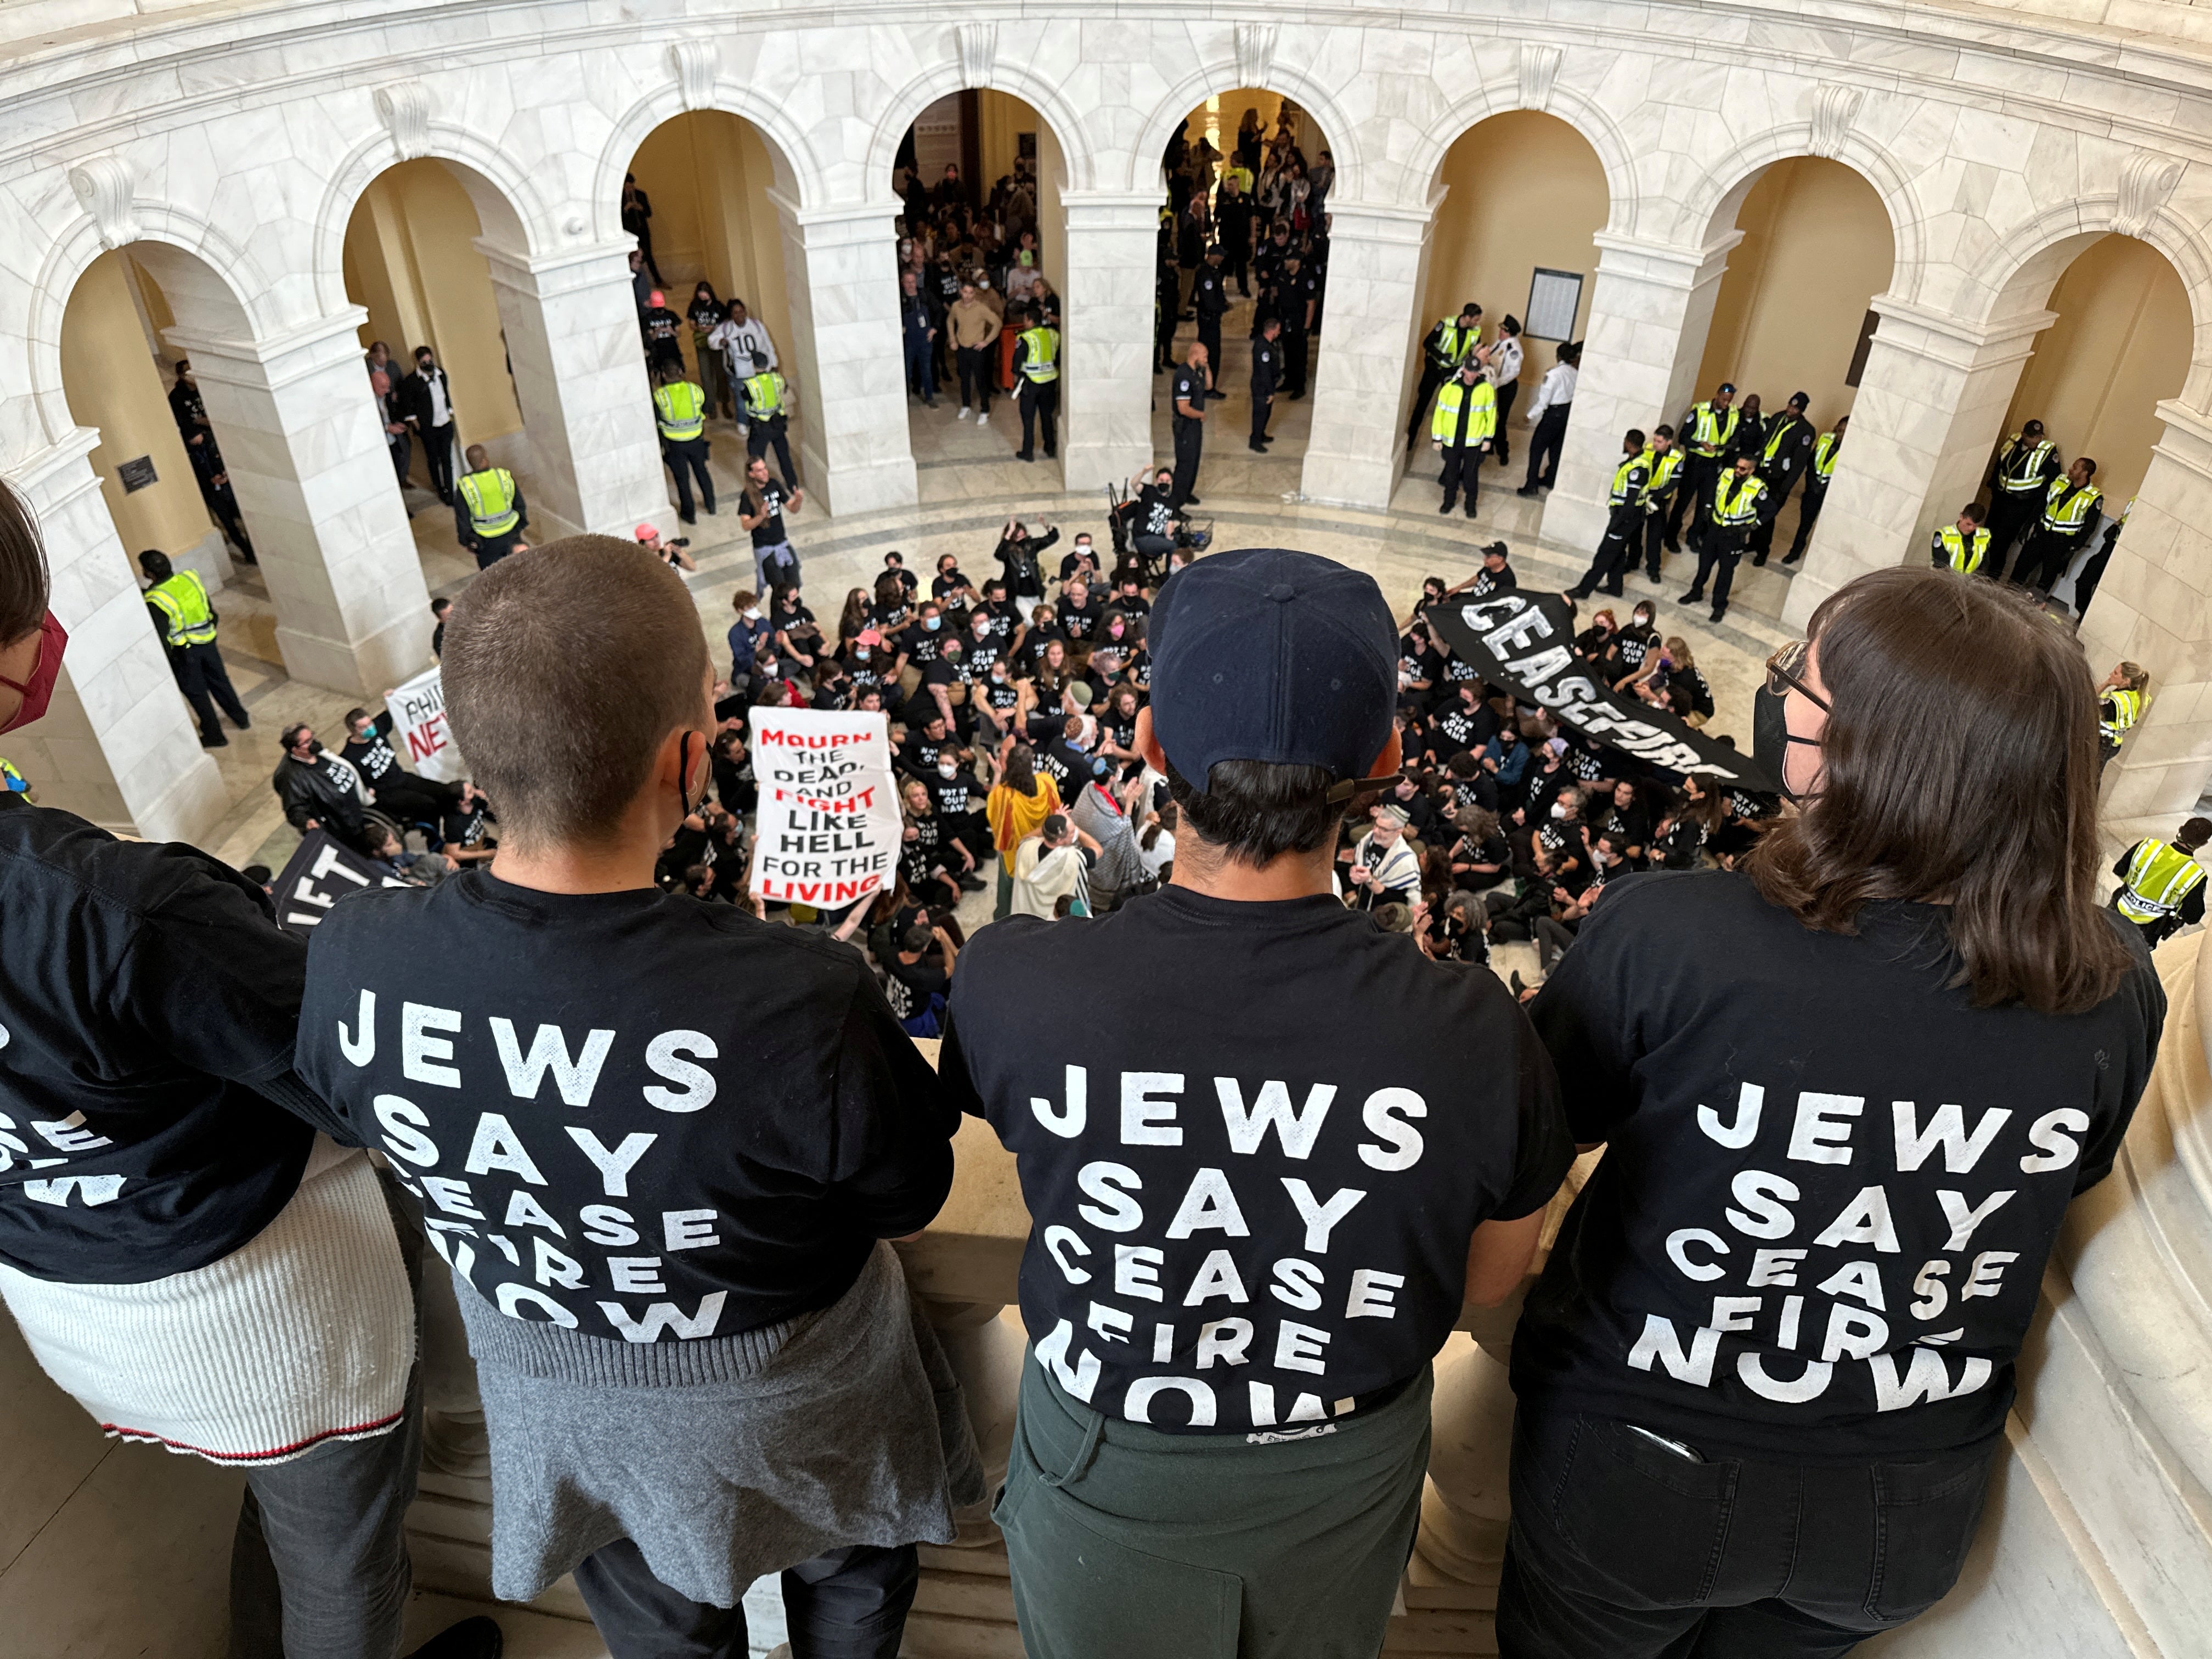 Protesters calling for a cease fire in Gaza occupy House office building rotunda on Capitol Hill in Washington